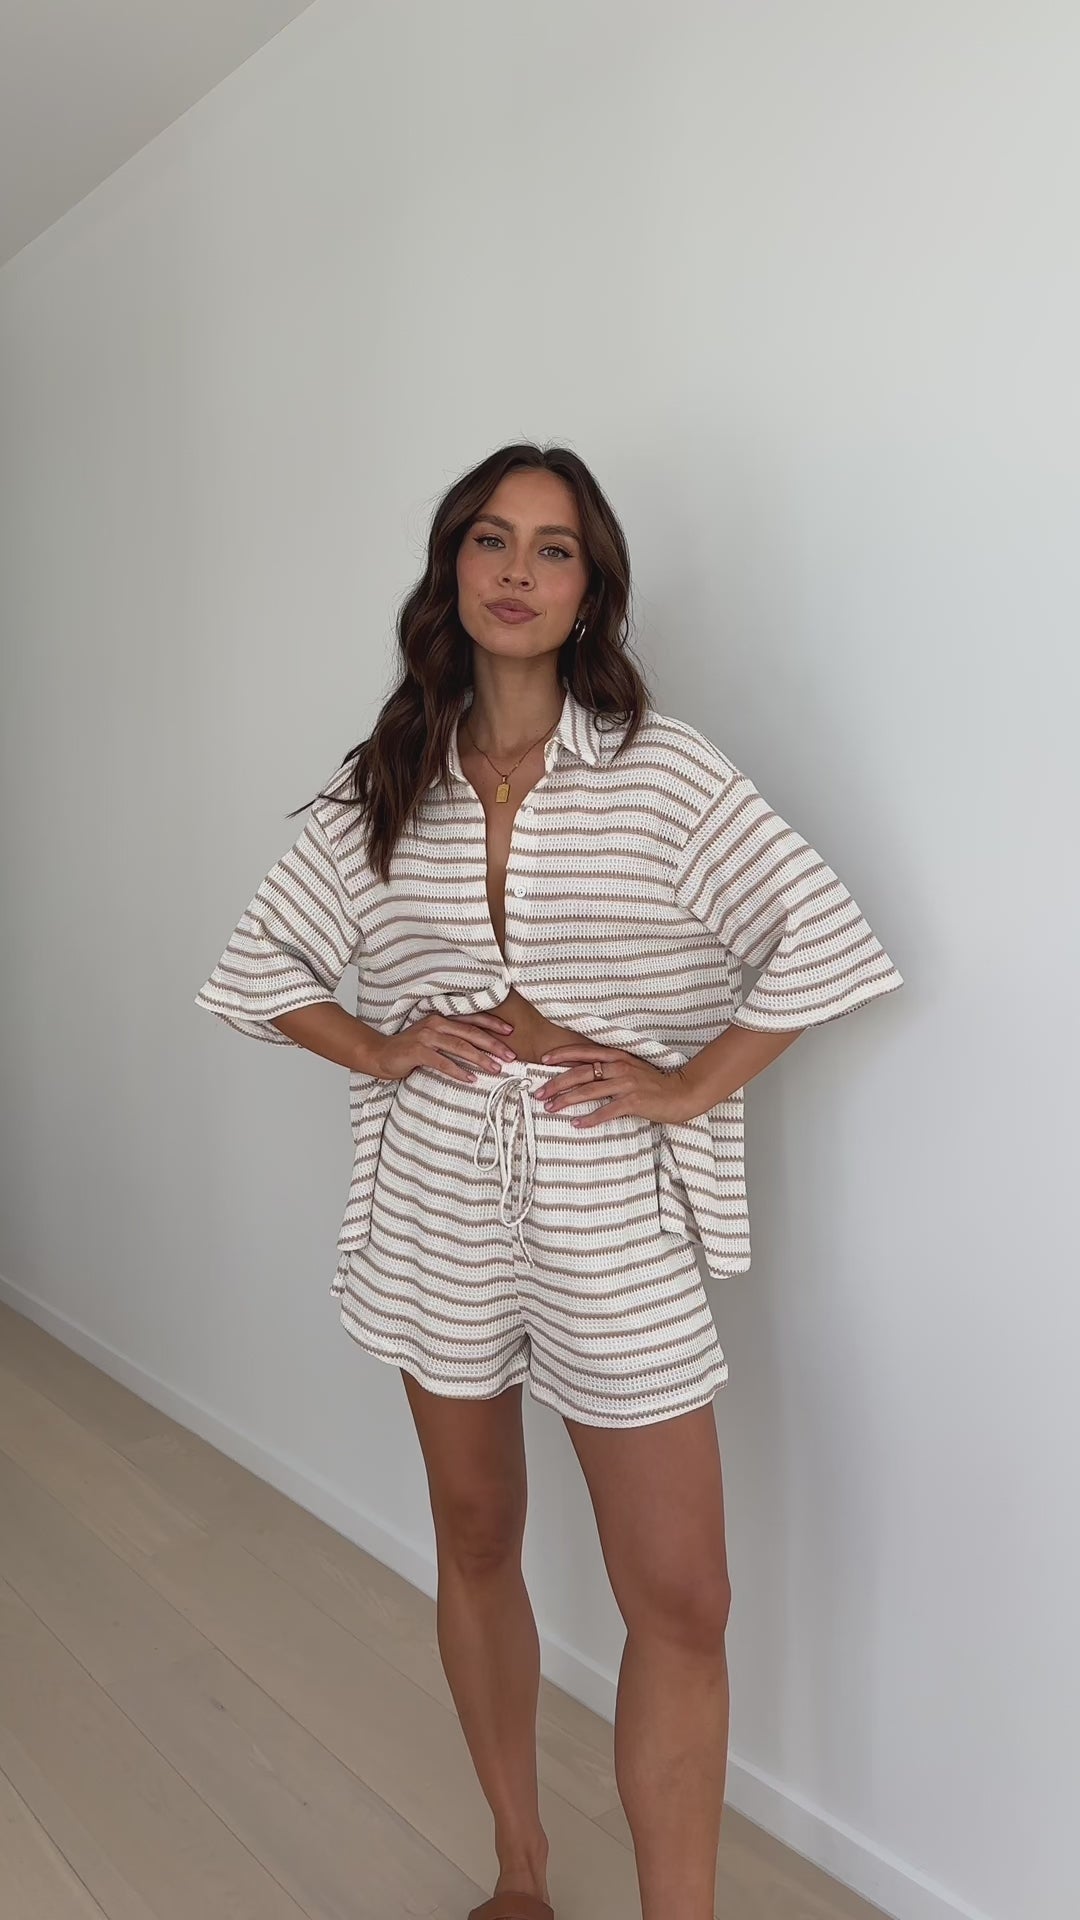 Lacole Button Up Shirt and Shorts Set - White / Beige Stripe